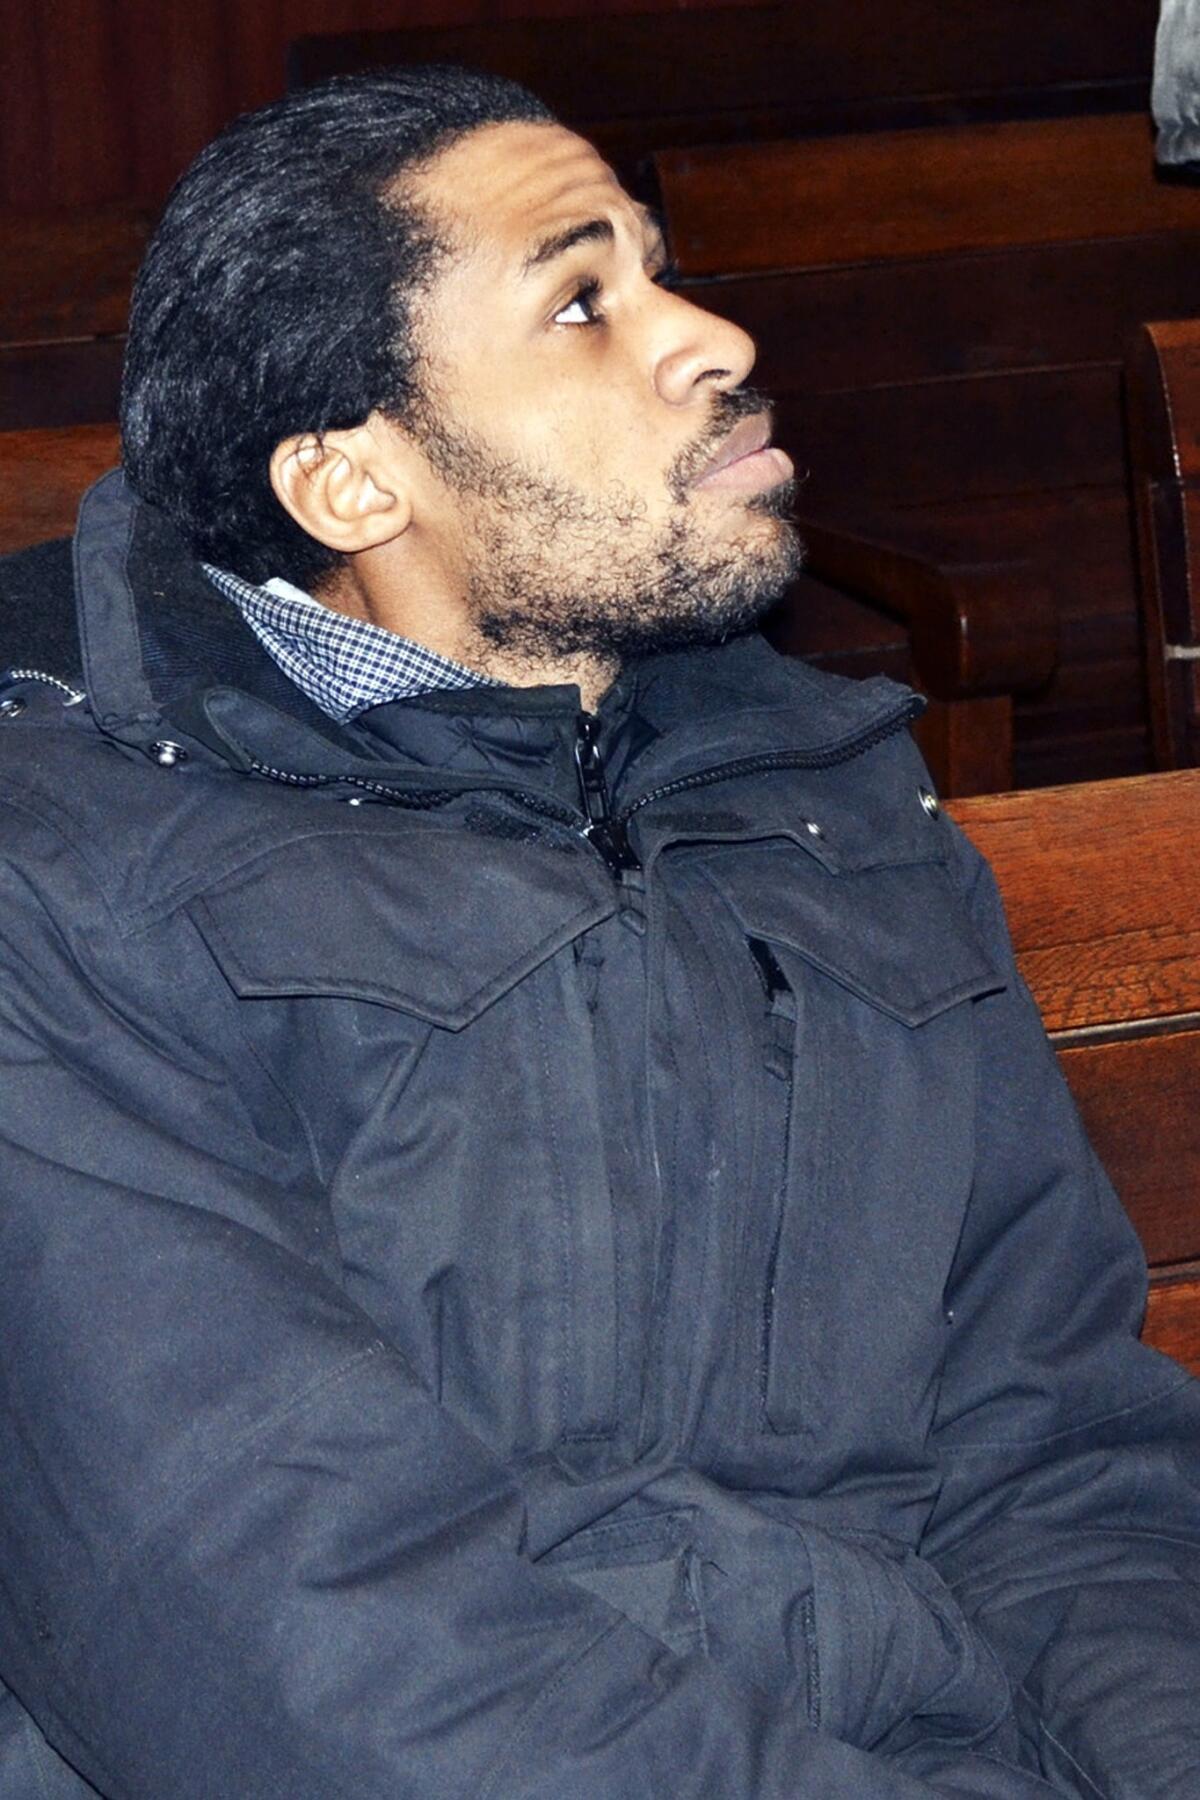 Frenchman Fritz-Joly Joachin, 29, a French citizen of Haitian origin is shown in the court in Haskovo, Bulgaria, on Monday.